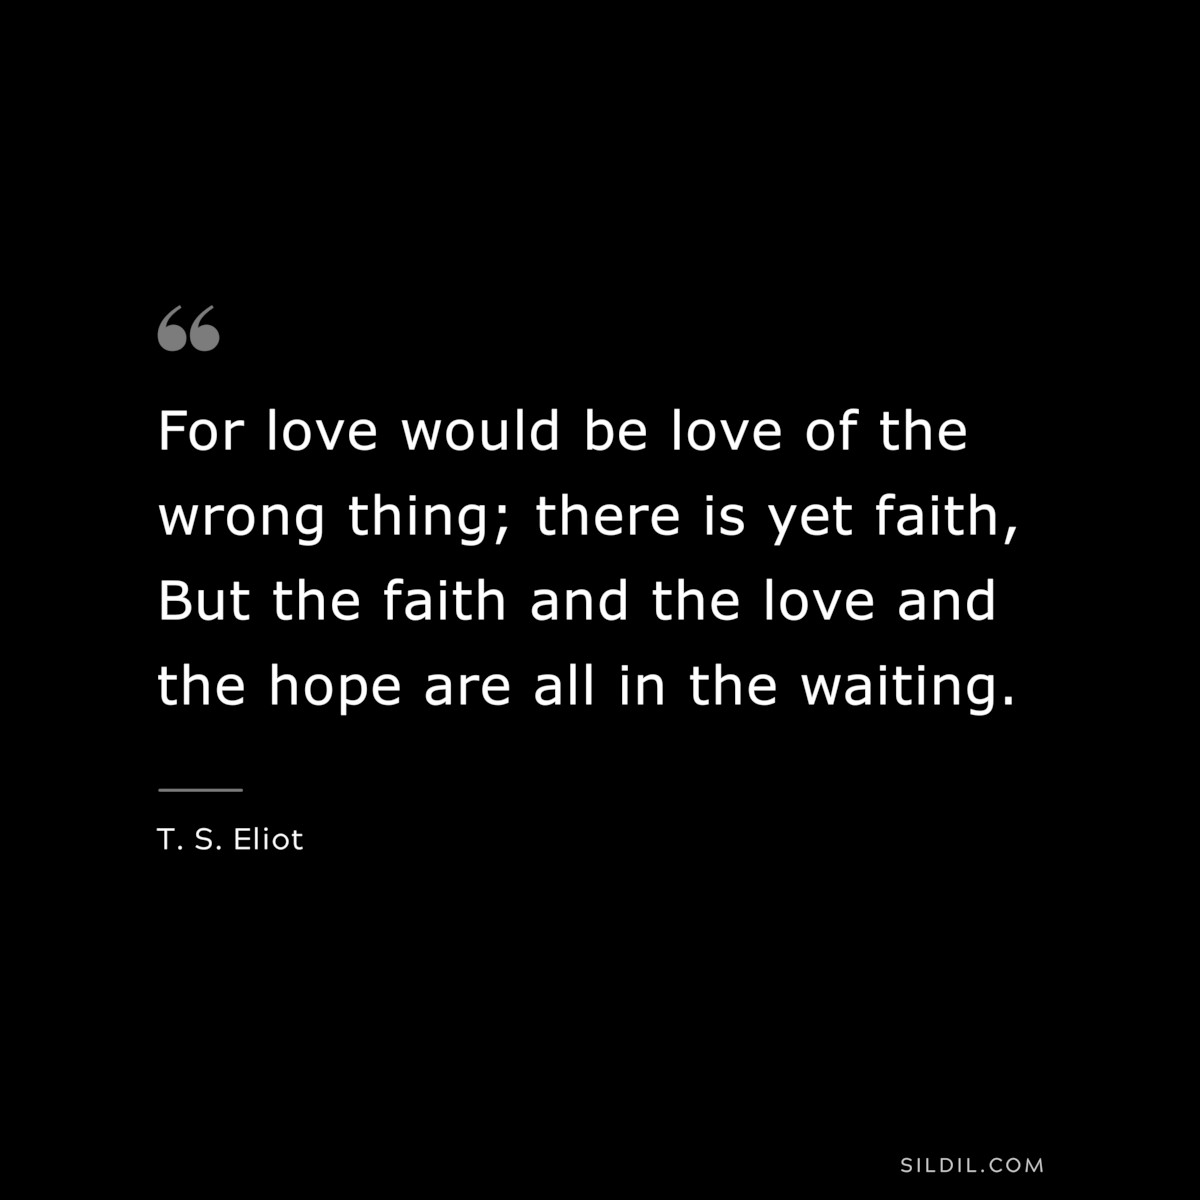 For love would be love of the wrong thing; there is yet faith, But the faith and the love and the hope are all in the waiting. ― T. S. Eliot